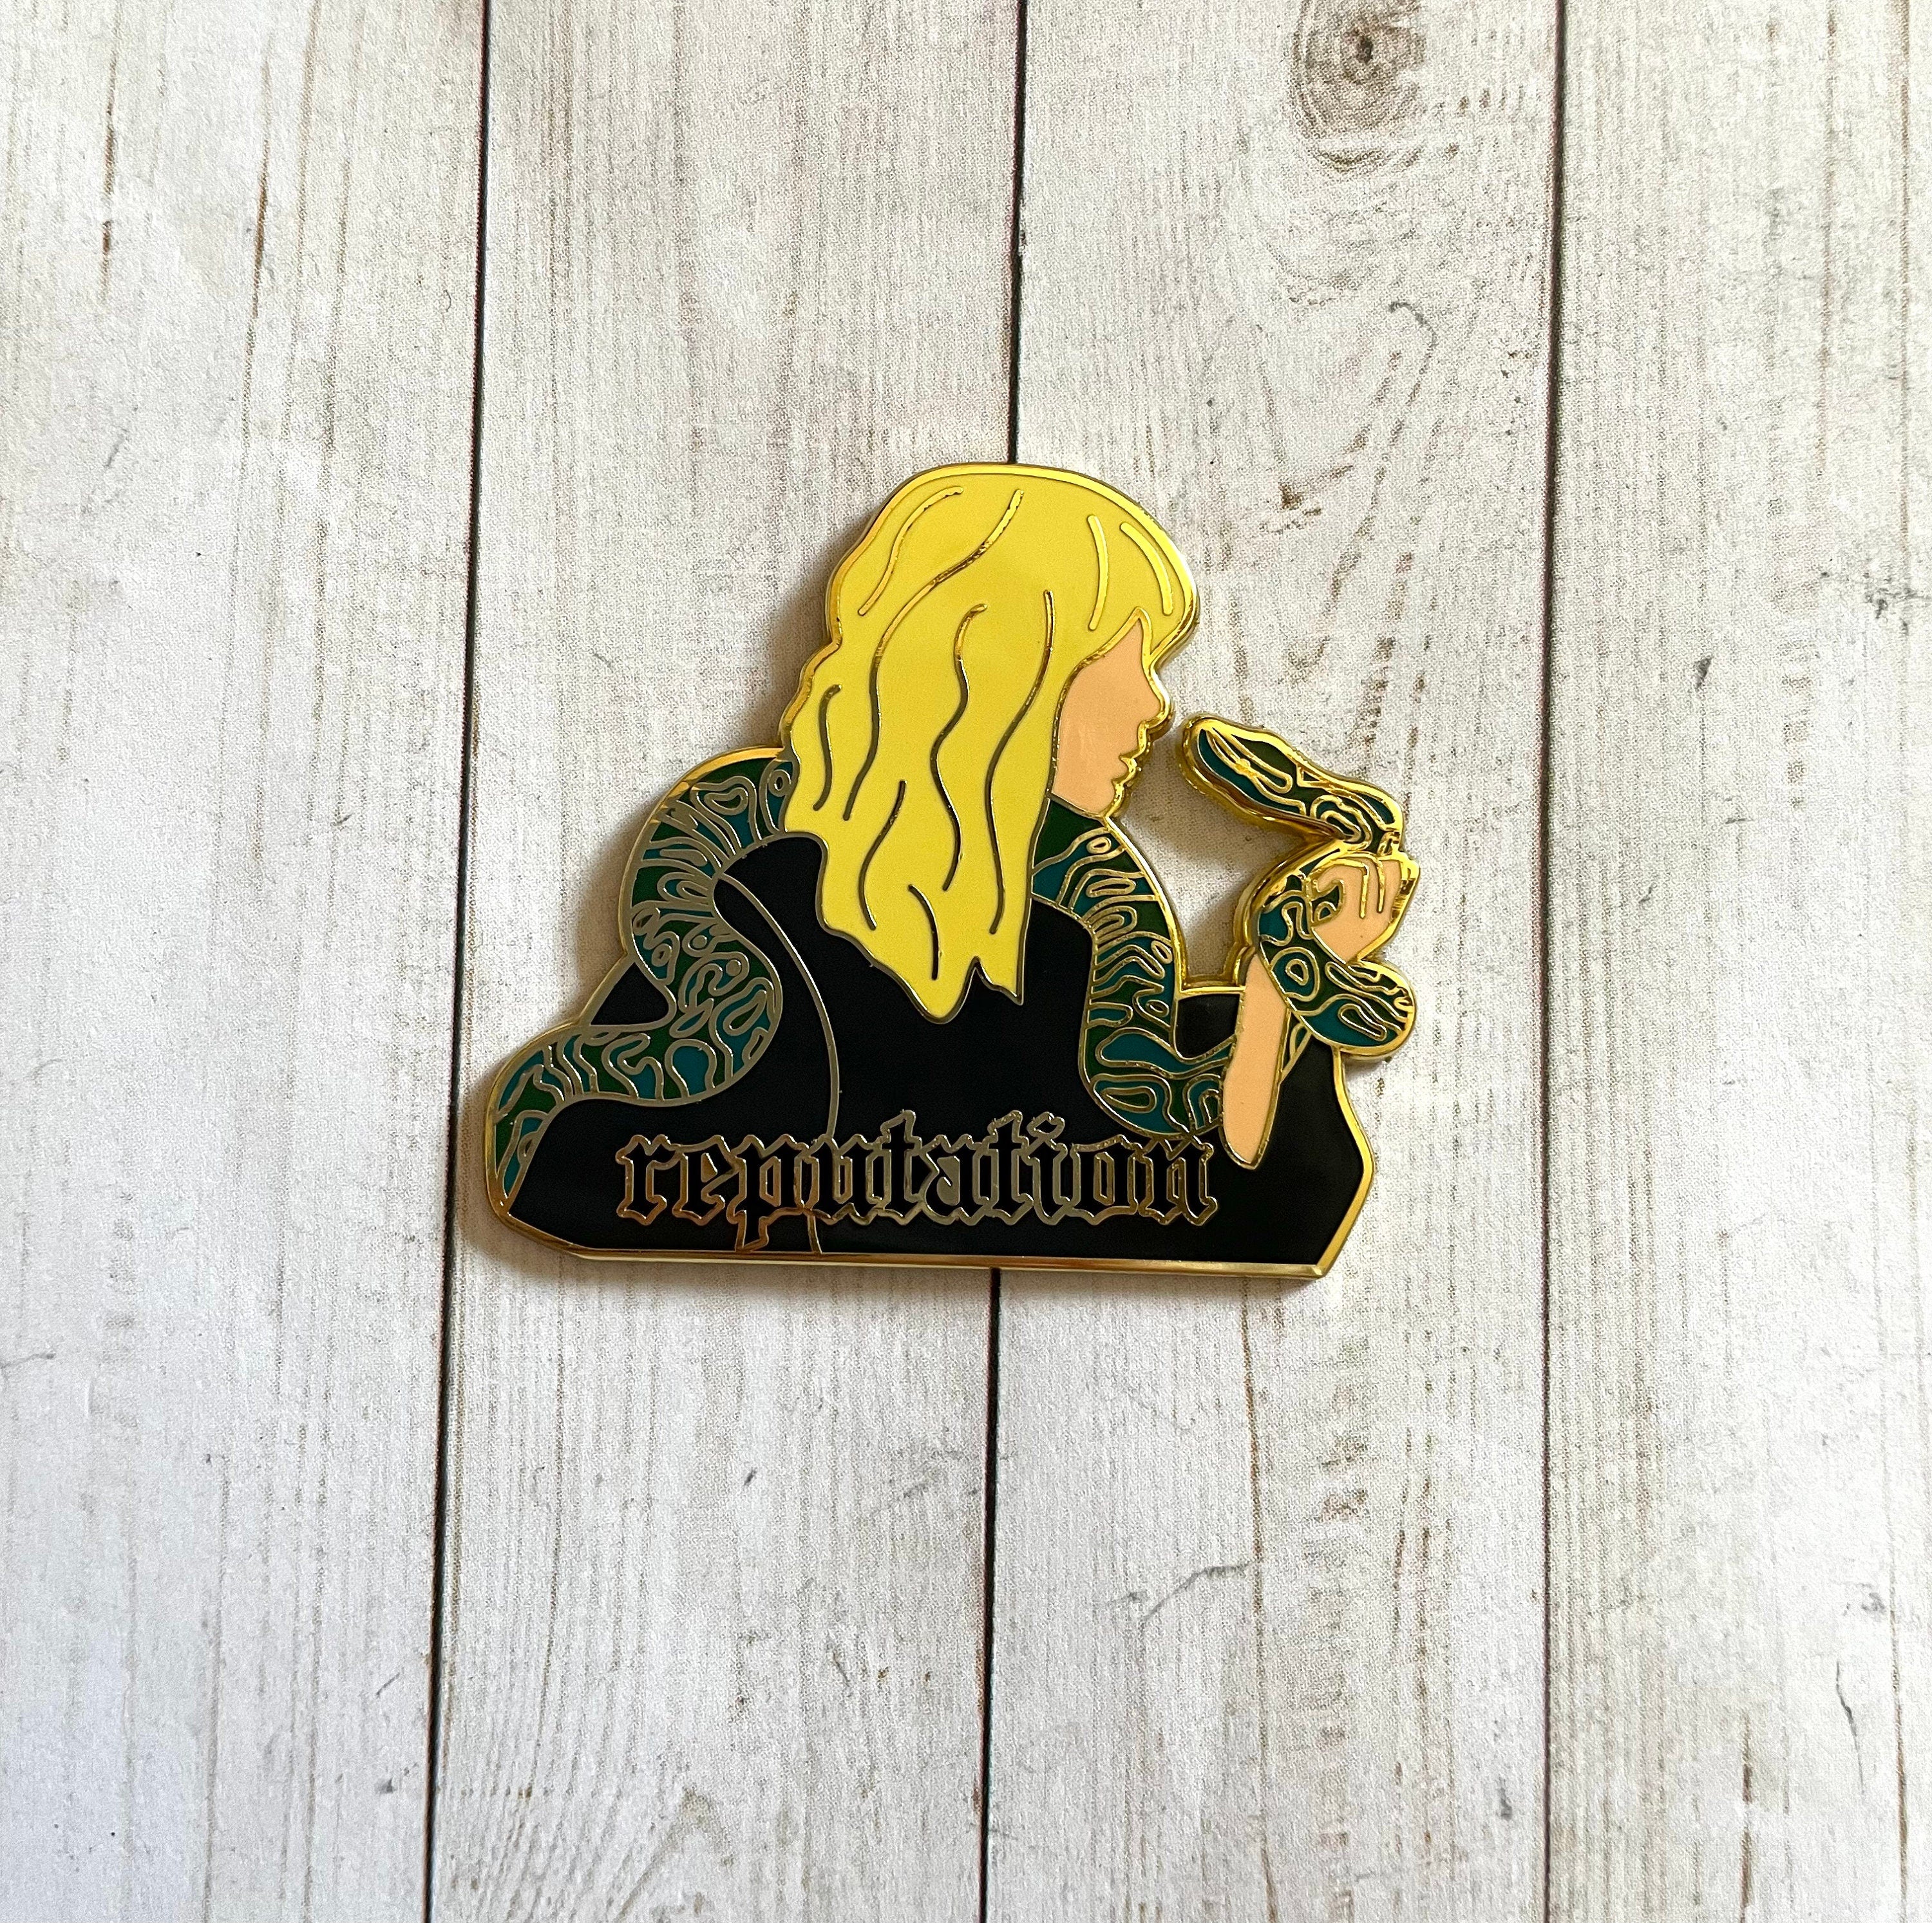 Taylor Swift Pin - Reputation Pin - Look What You Made Me Do Pin